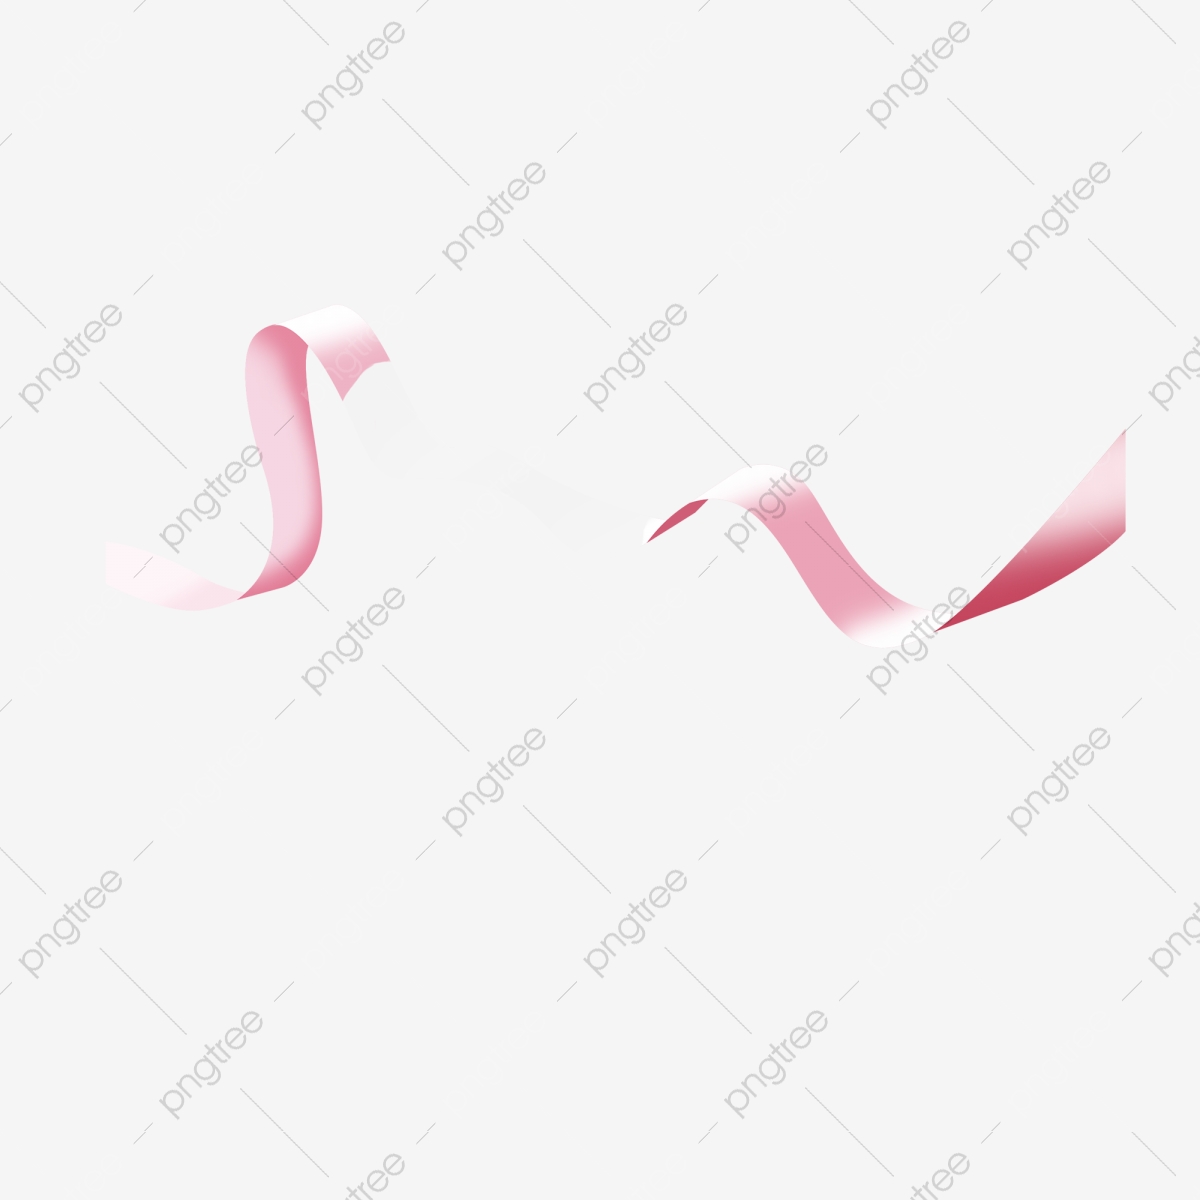 streamers clipart pink streamer